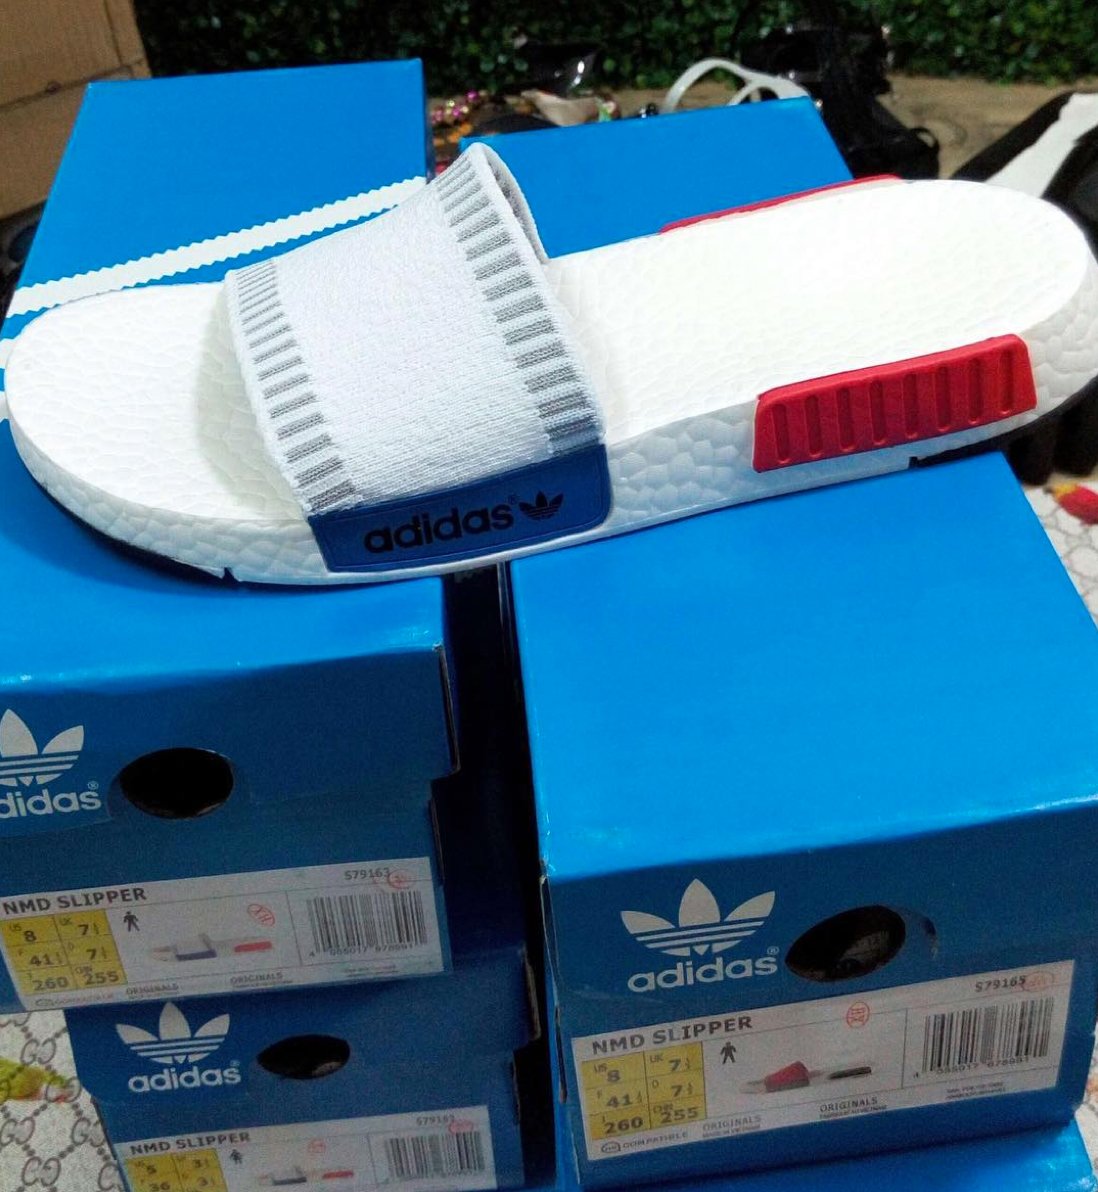 adidas nmd slippers